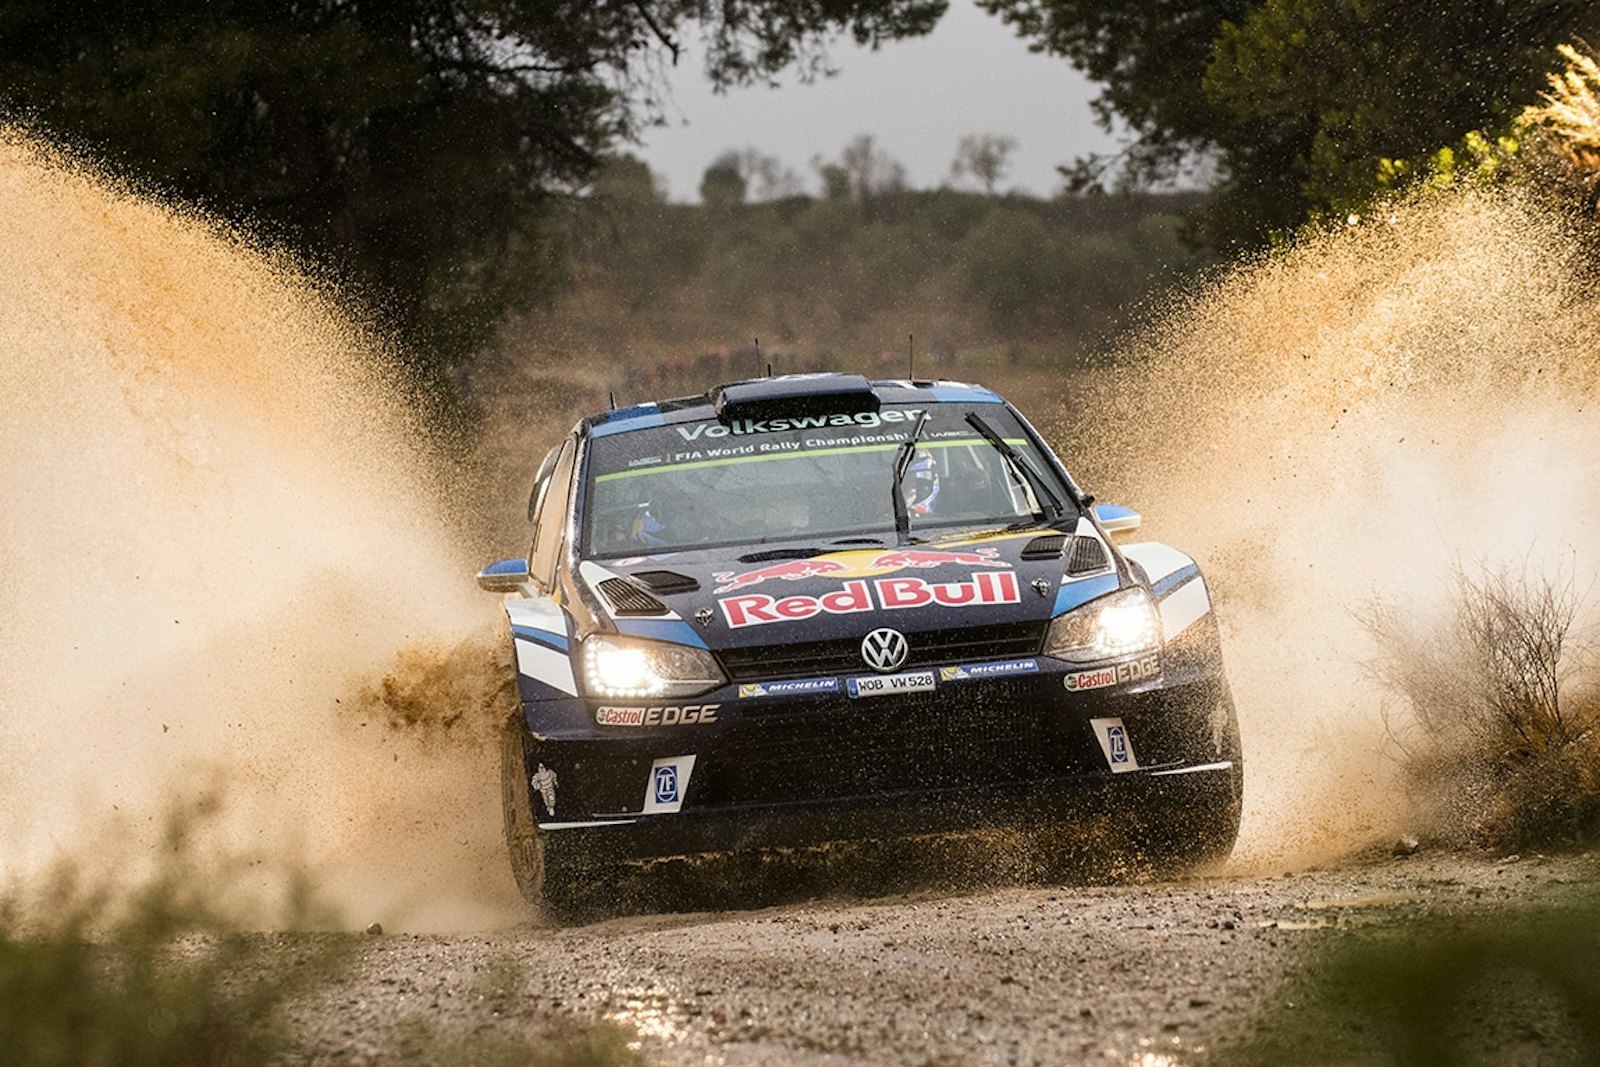 Sebastien Ogier (FRA) performs during FIA World Rally Championship 2016 Spain in Salou , Spain  on 14 October 2016 // Jaanus Ree/Red Bull Content Pool // P-20161014-00868 // Usage for editorial use only // Please go to www.redbullcontentpool.com for further information. //